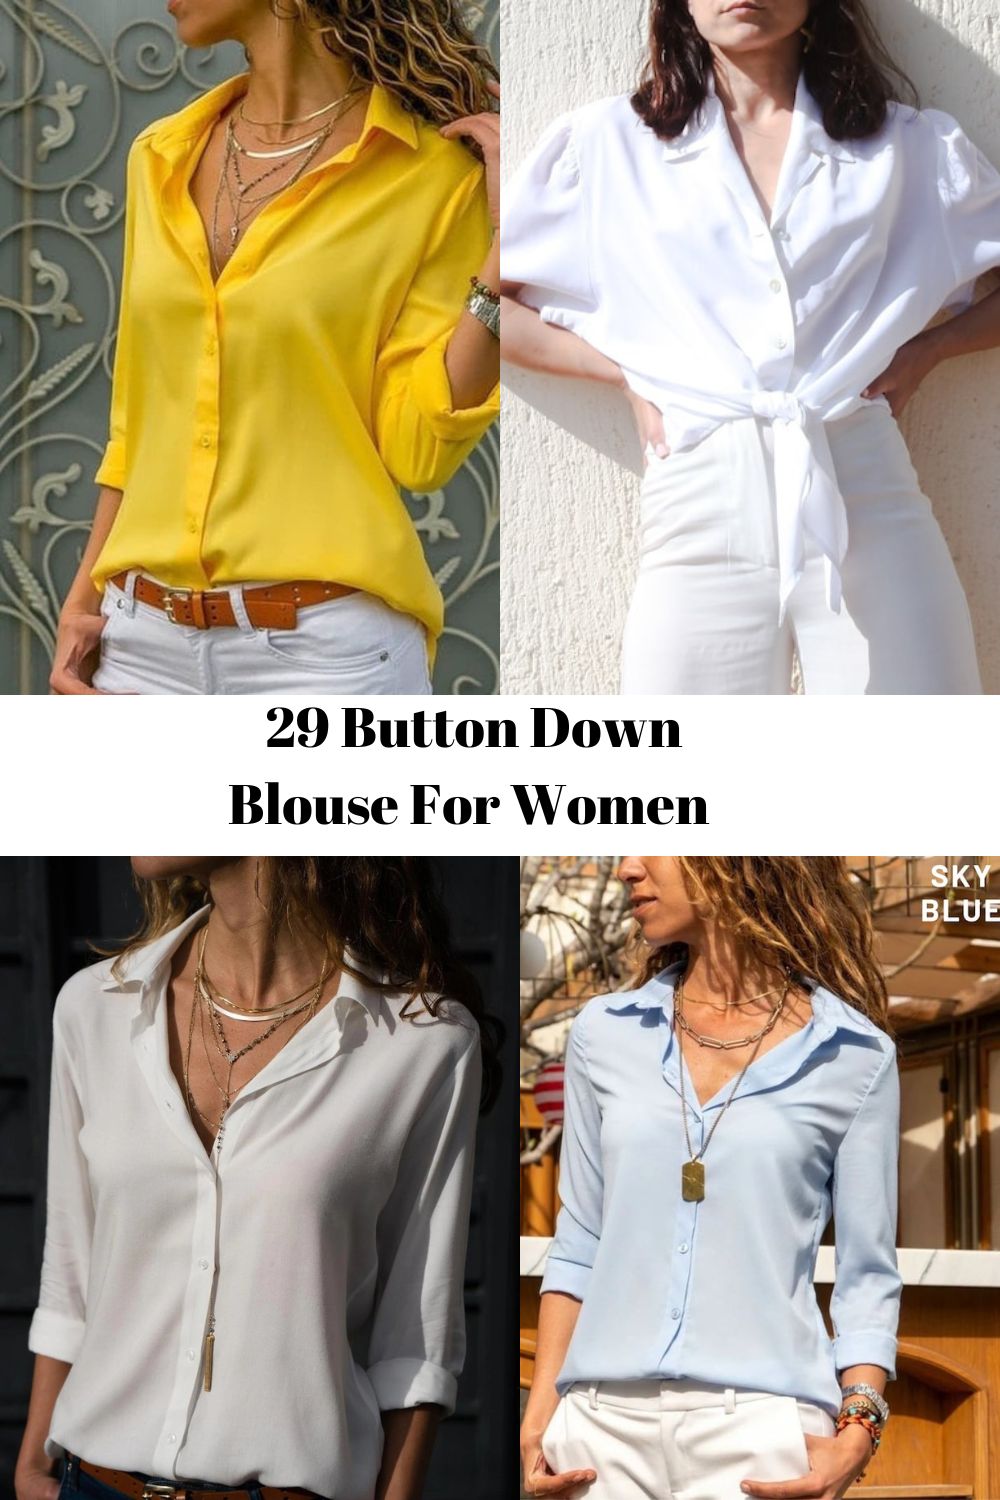 29 Button Down Blouse For Women 